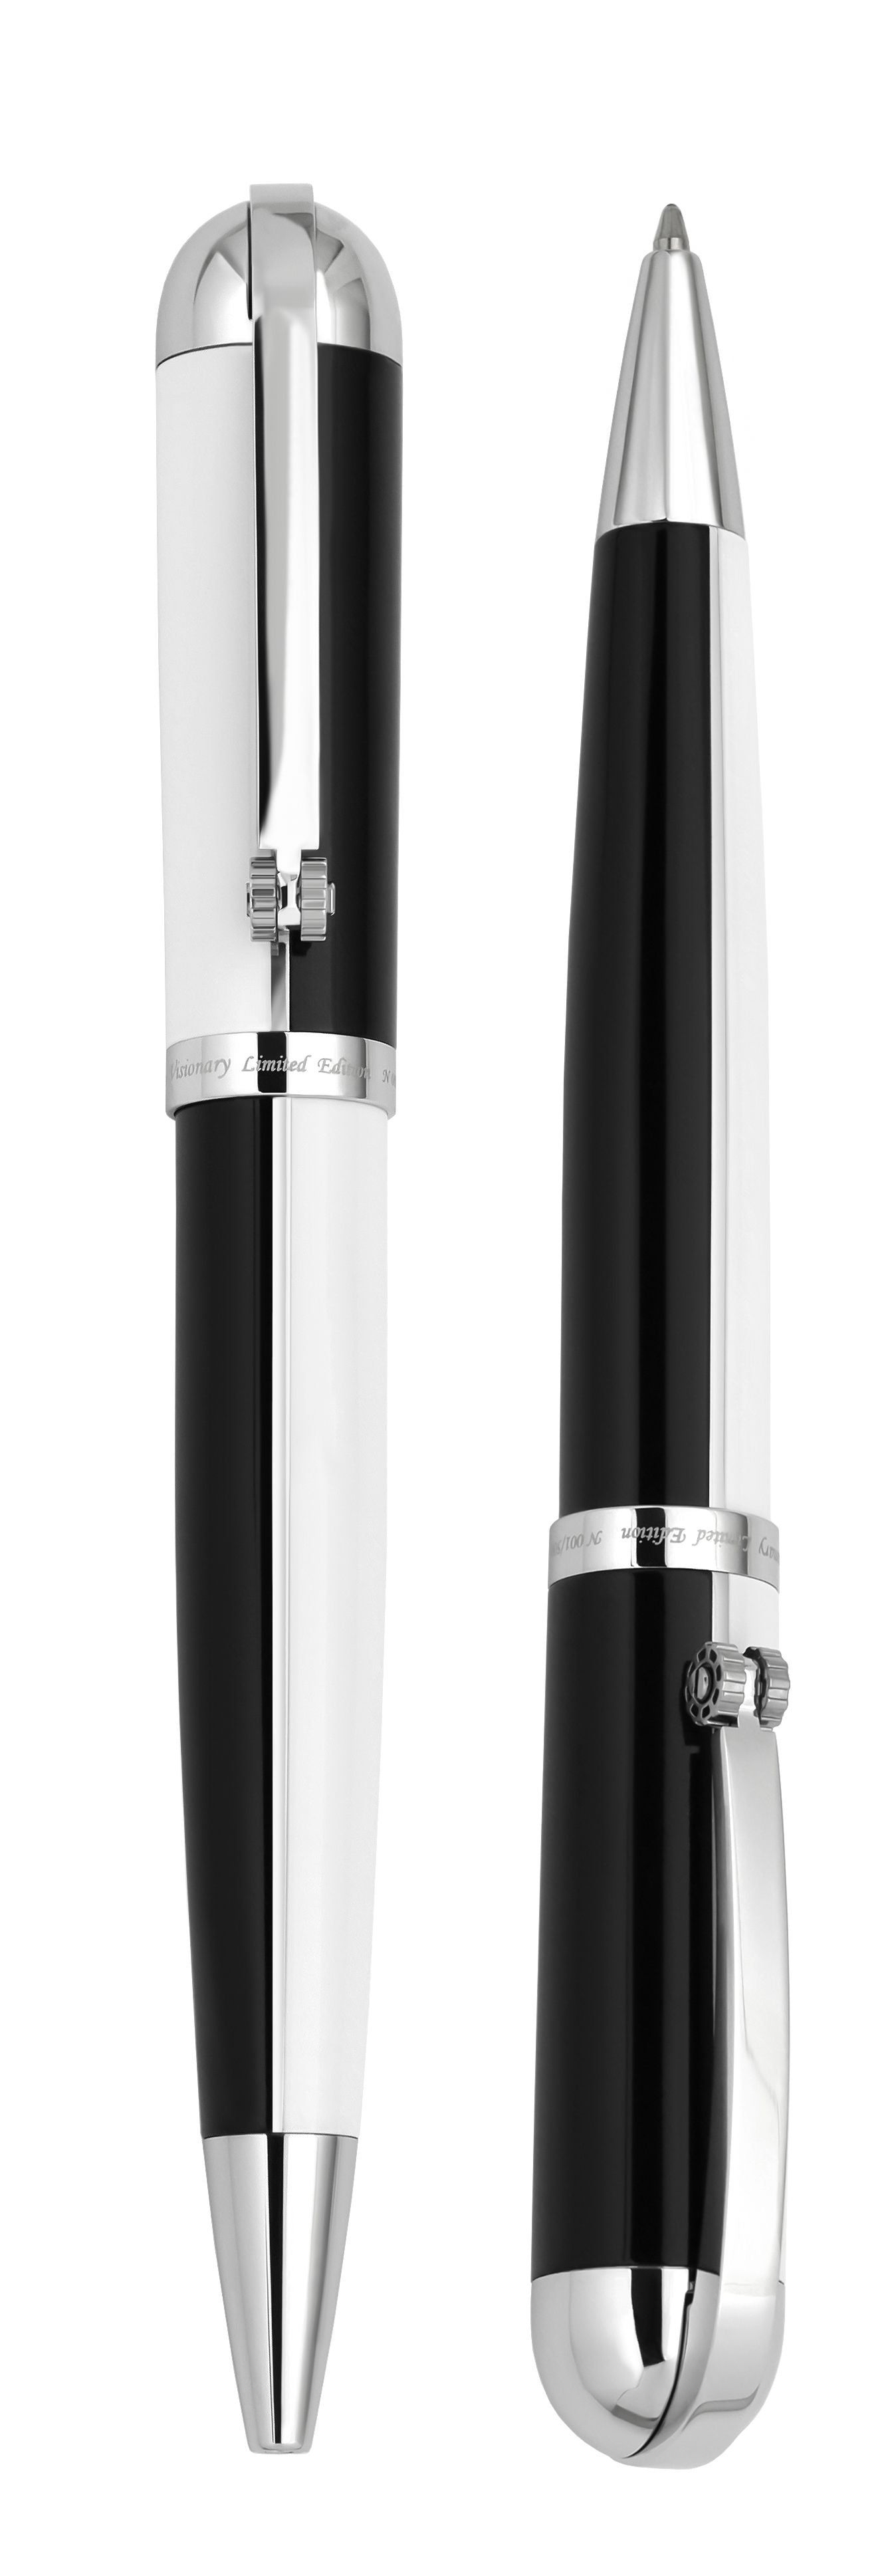 Xezo - Vertical view of two Visionary Black/White B ballpoint pens. The pen on the left is untwisted, and the pen on the right is twisted to show the writing point